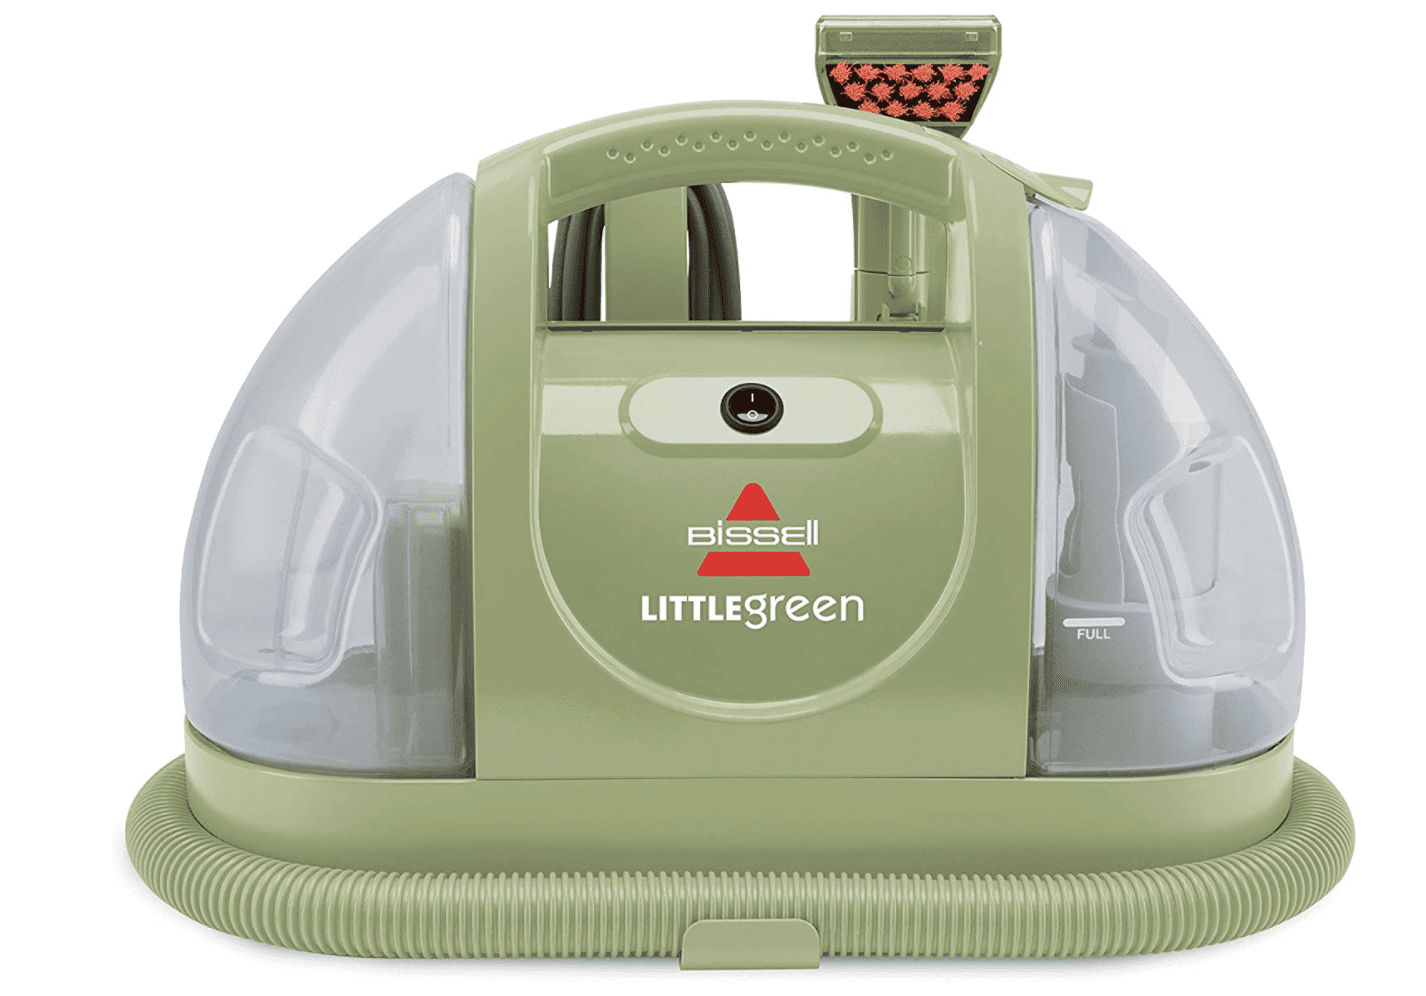 https://cdn.apartmenttherapy.info/image/upload/v1617298178/gen-workflow/product-database/Bissell%20Multi-Purpose%20Portable%20Carpet%20and%20Upholstery%20Cleaner.png